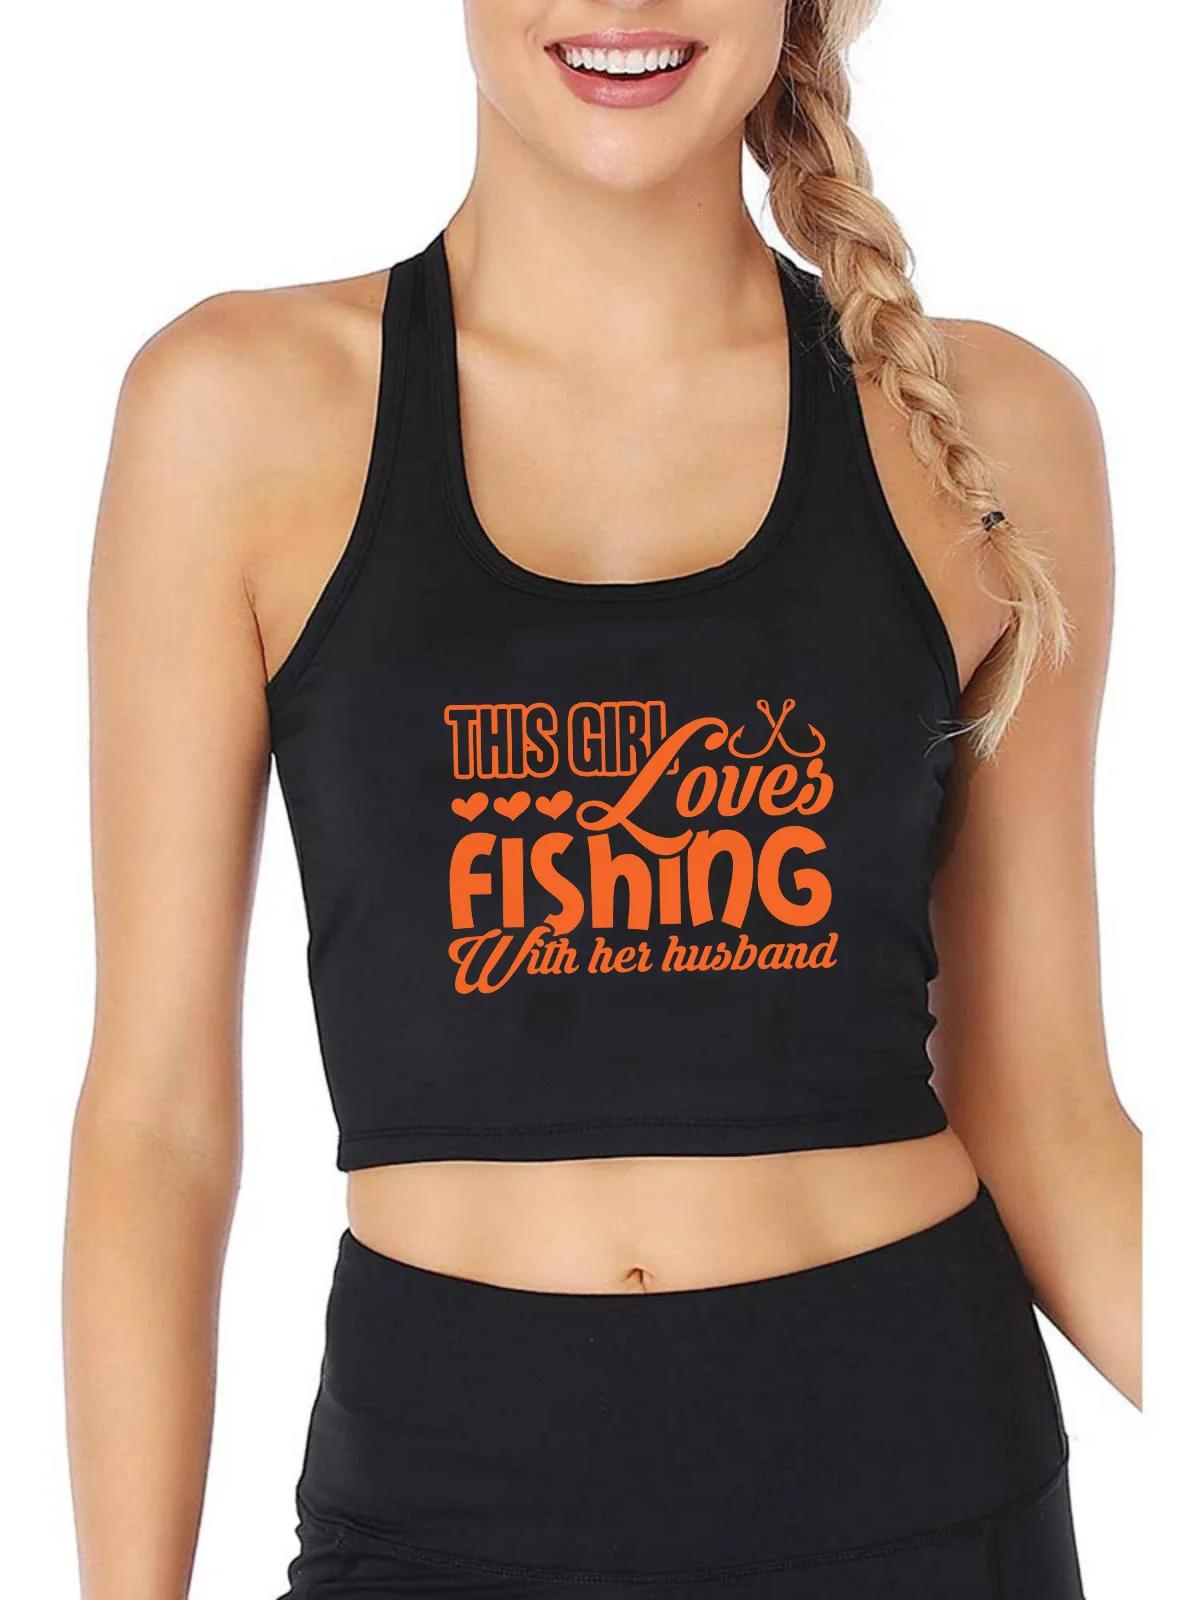 Loves Fishing With Husband Print Tank Top Womens Yoga Sports Workout Crop Top Gym Tops